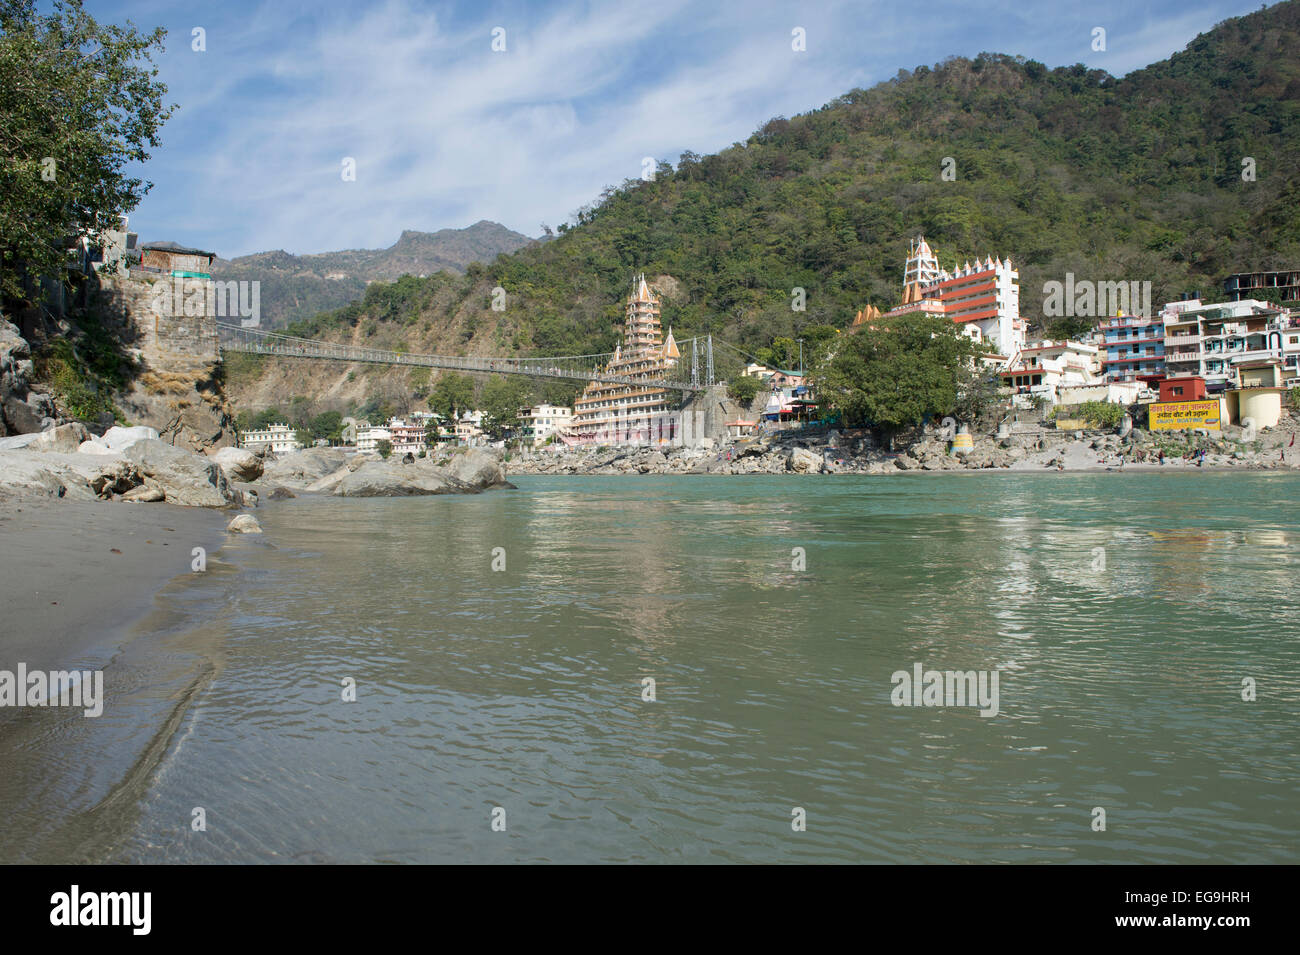 A view from the beach with the Temples and mountains of Rishikesh with Lakshman Jhula bridge crossing the Ganges or Ganga river. Stock Photo